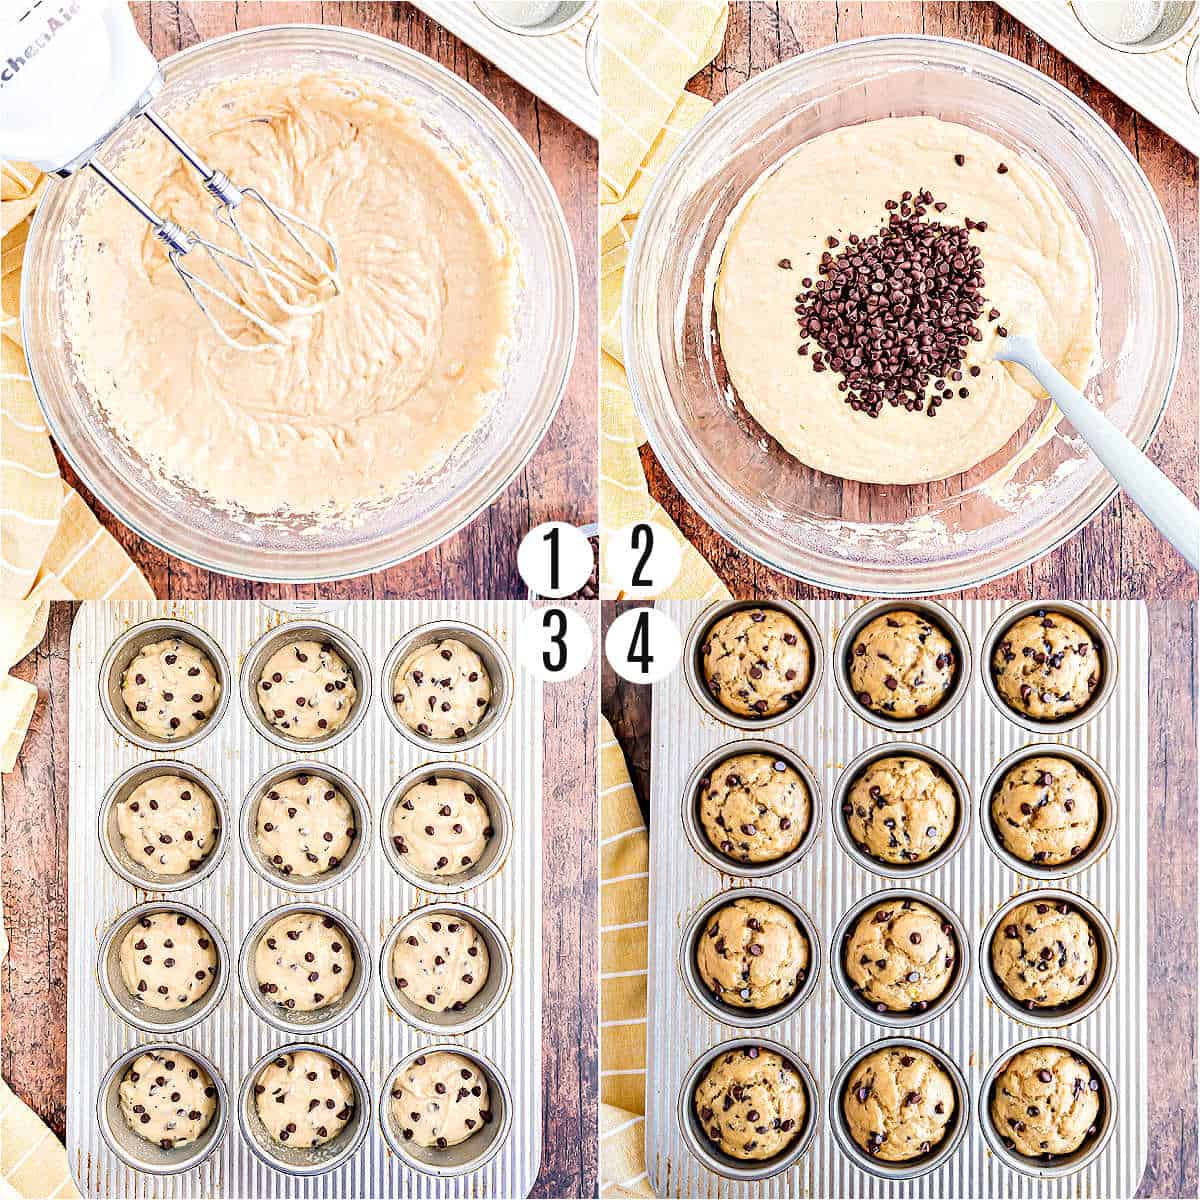 Step by step photos showing how to make healthy muffins.